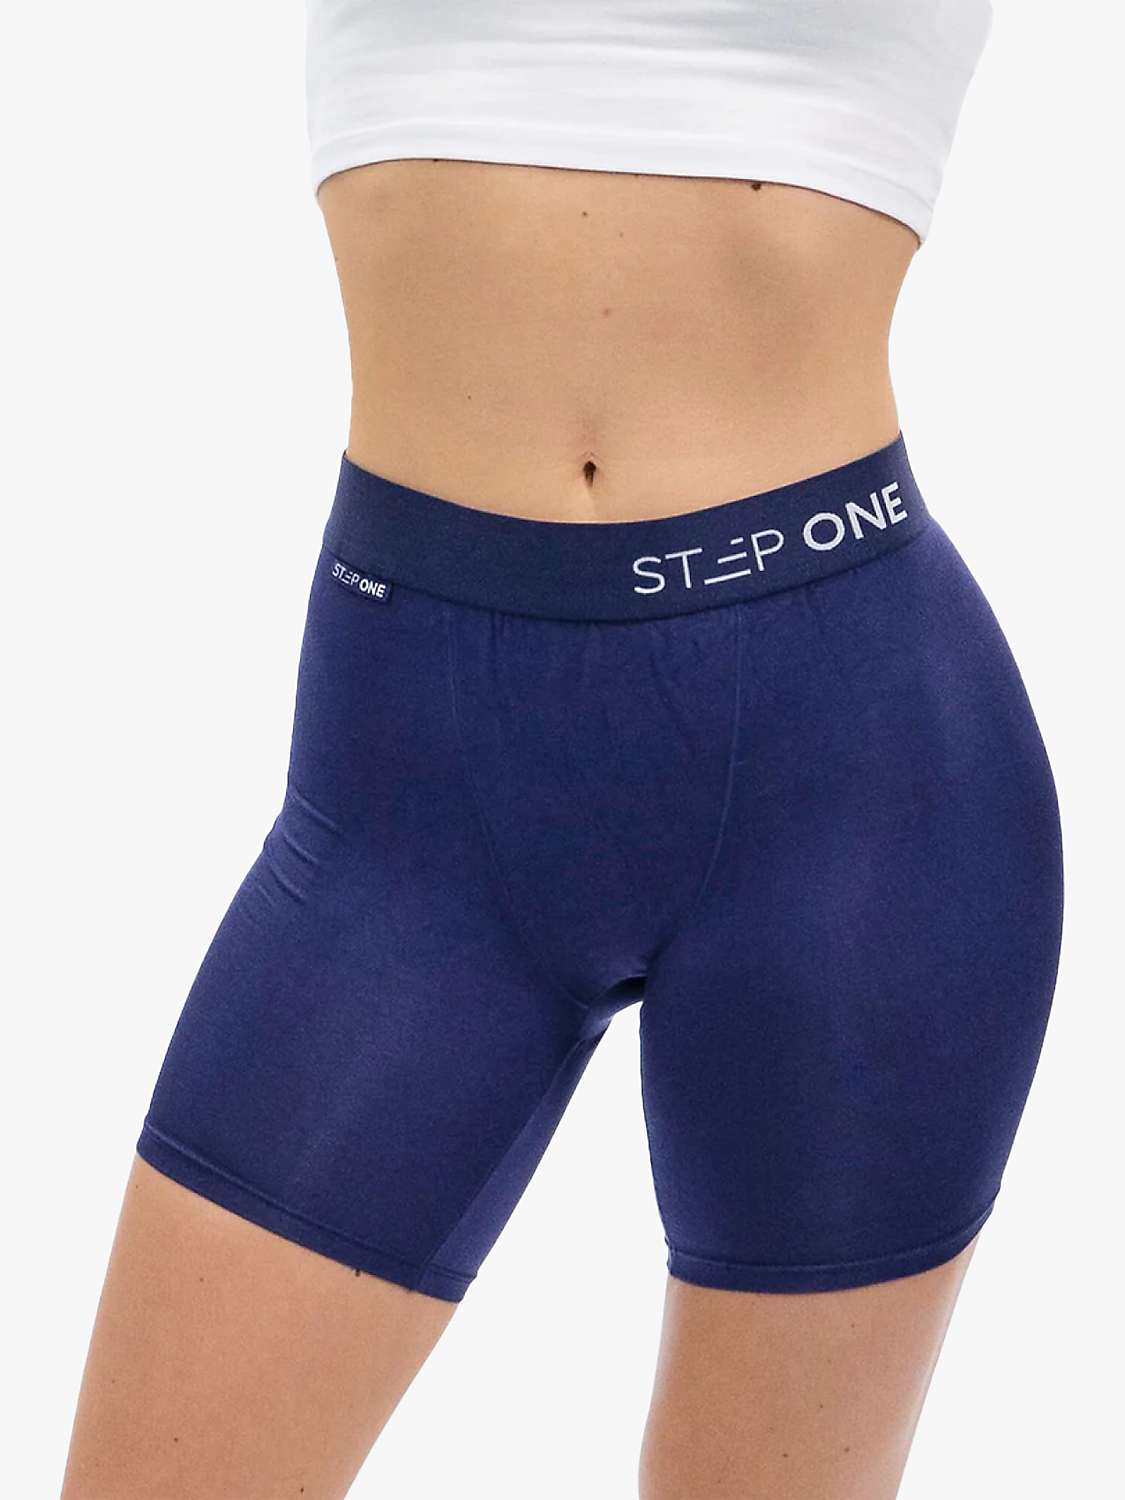 Buy Step One Bamboo Body Shorts Online at johnlewis.com